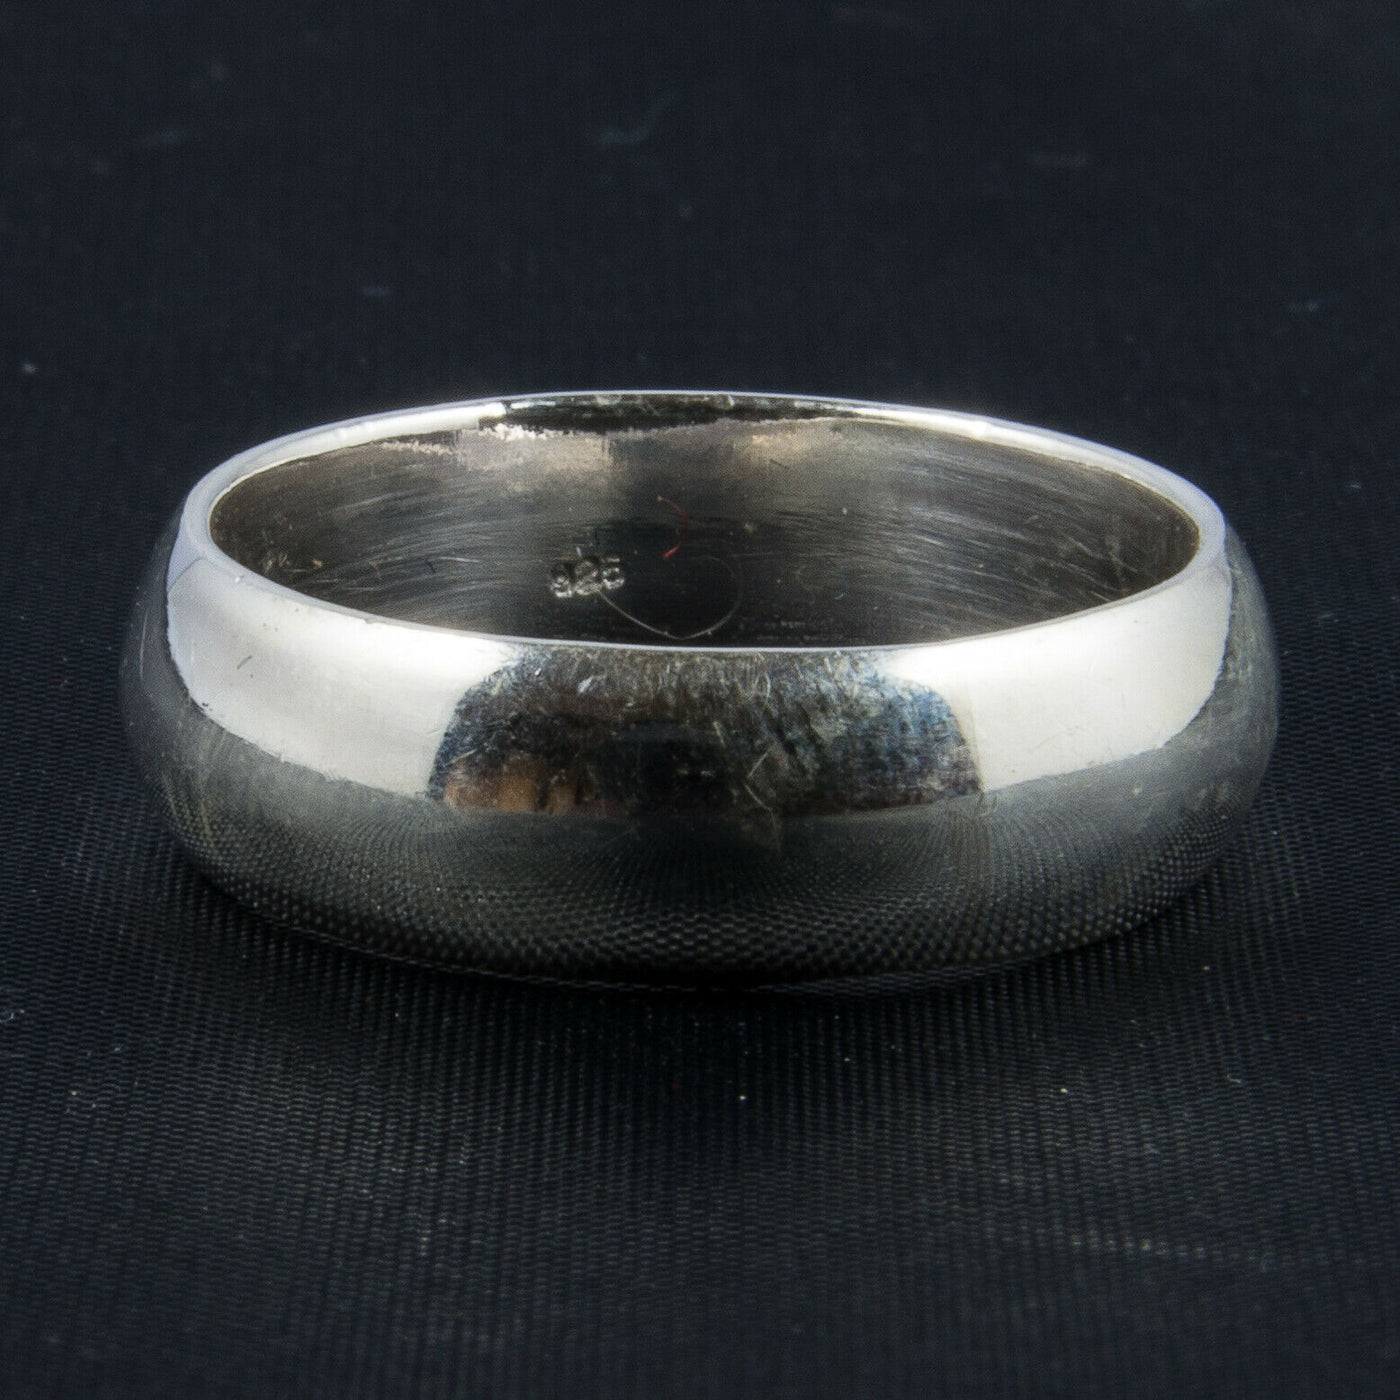 Wedding Band Ring Plain Promise Rounded Band .925 silver Biker feeanddave